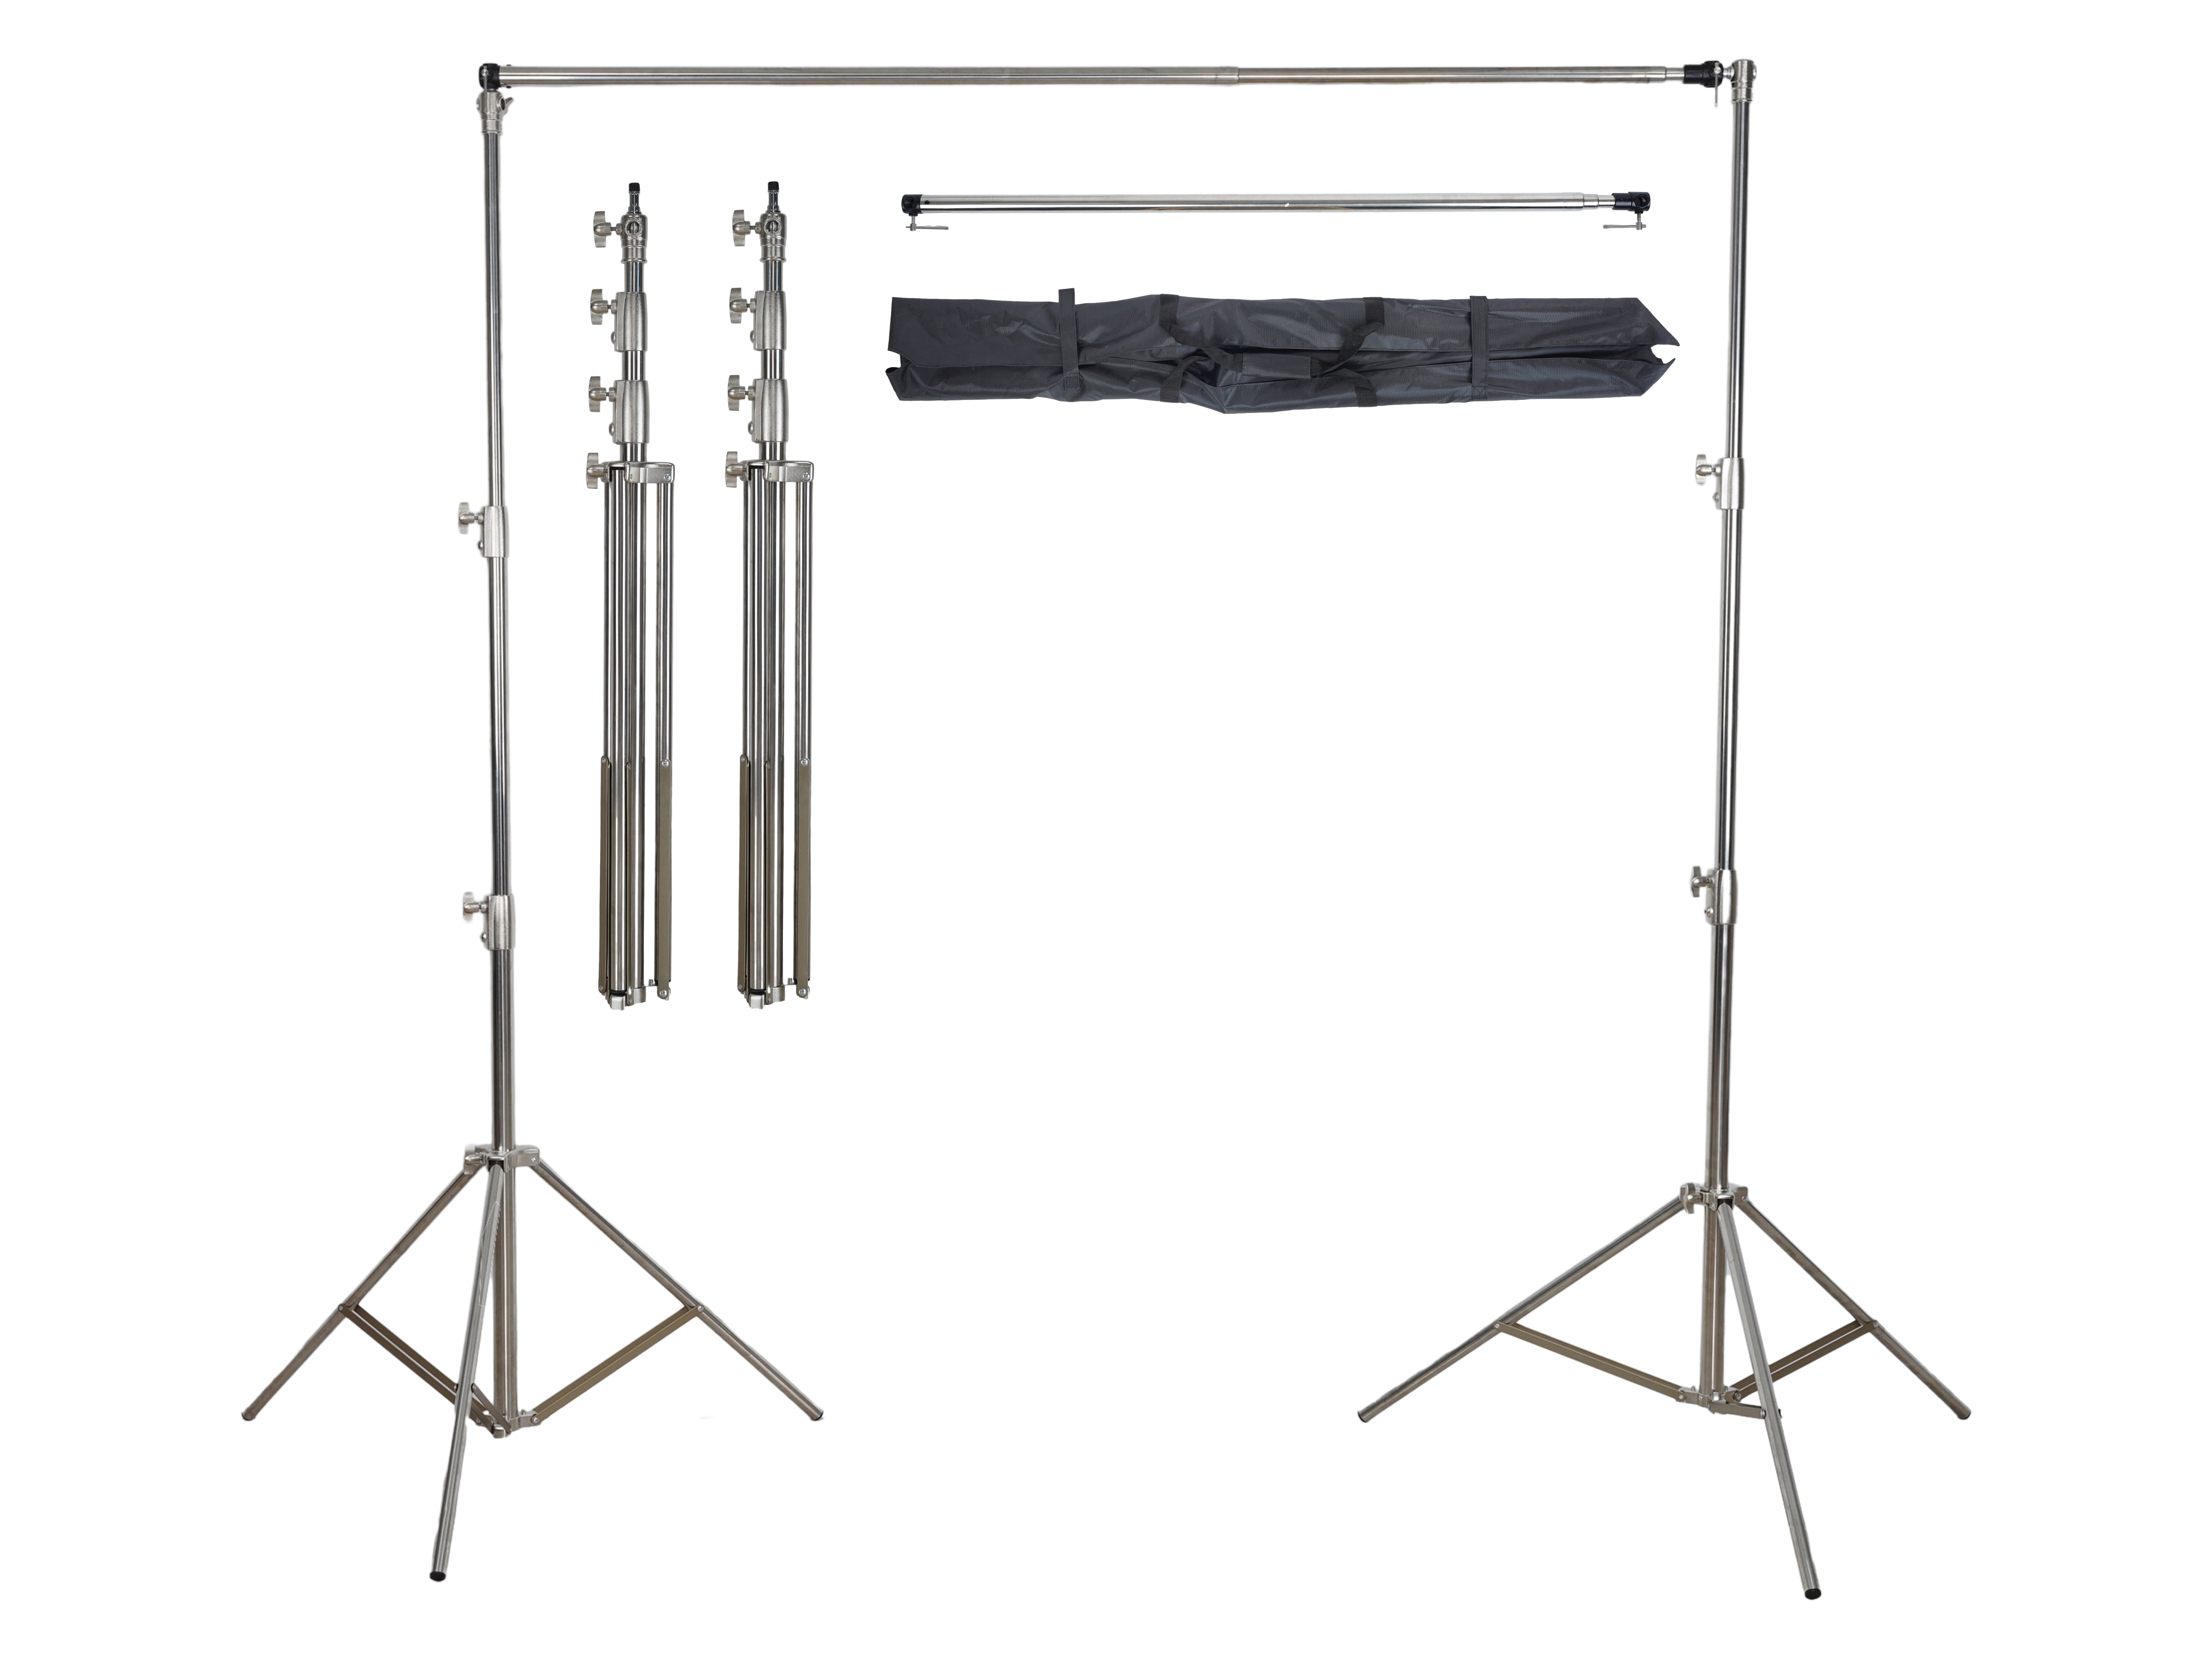 Kate Stainless Steel Adjustable Retractable Background Stand for Photography